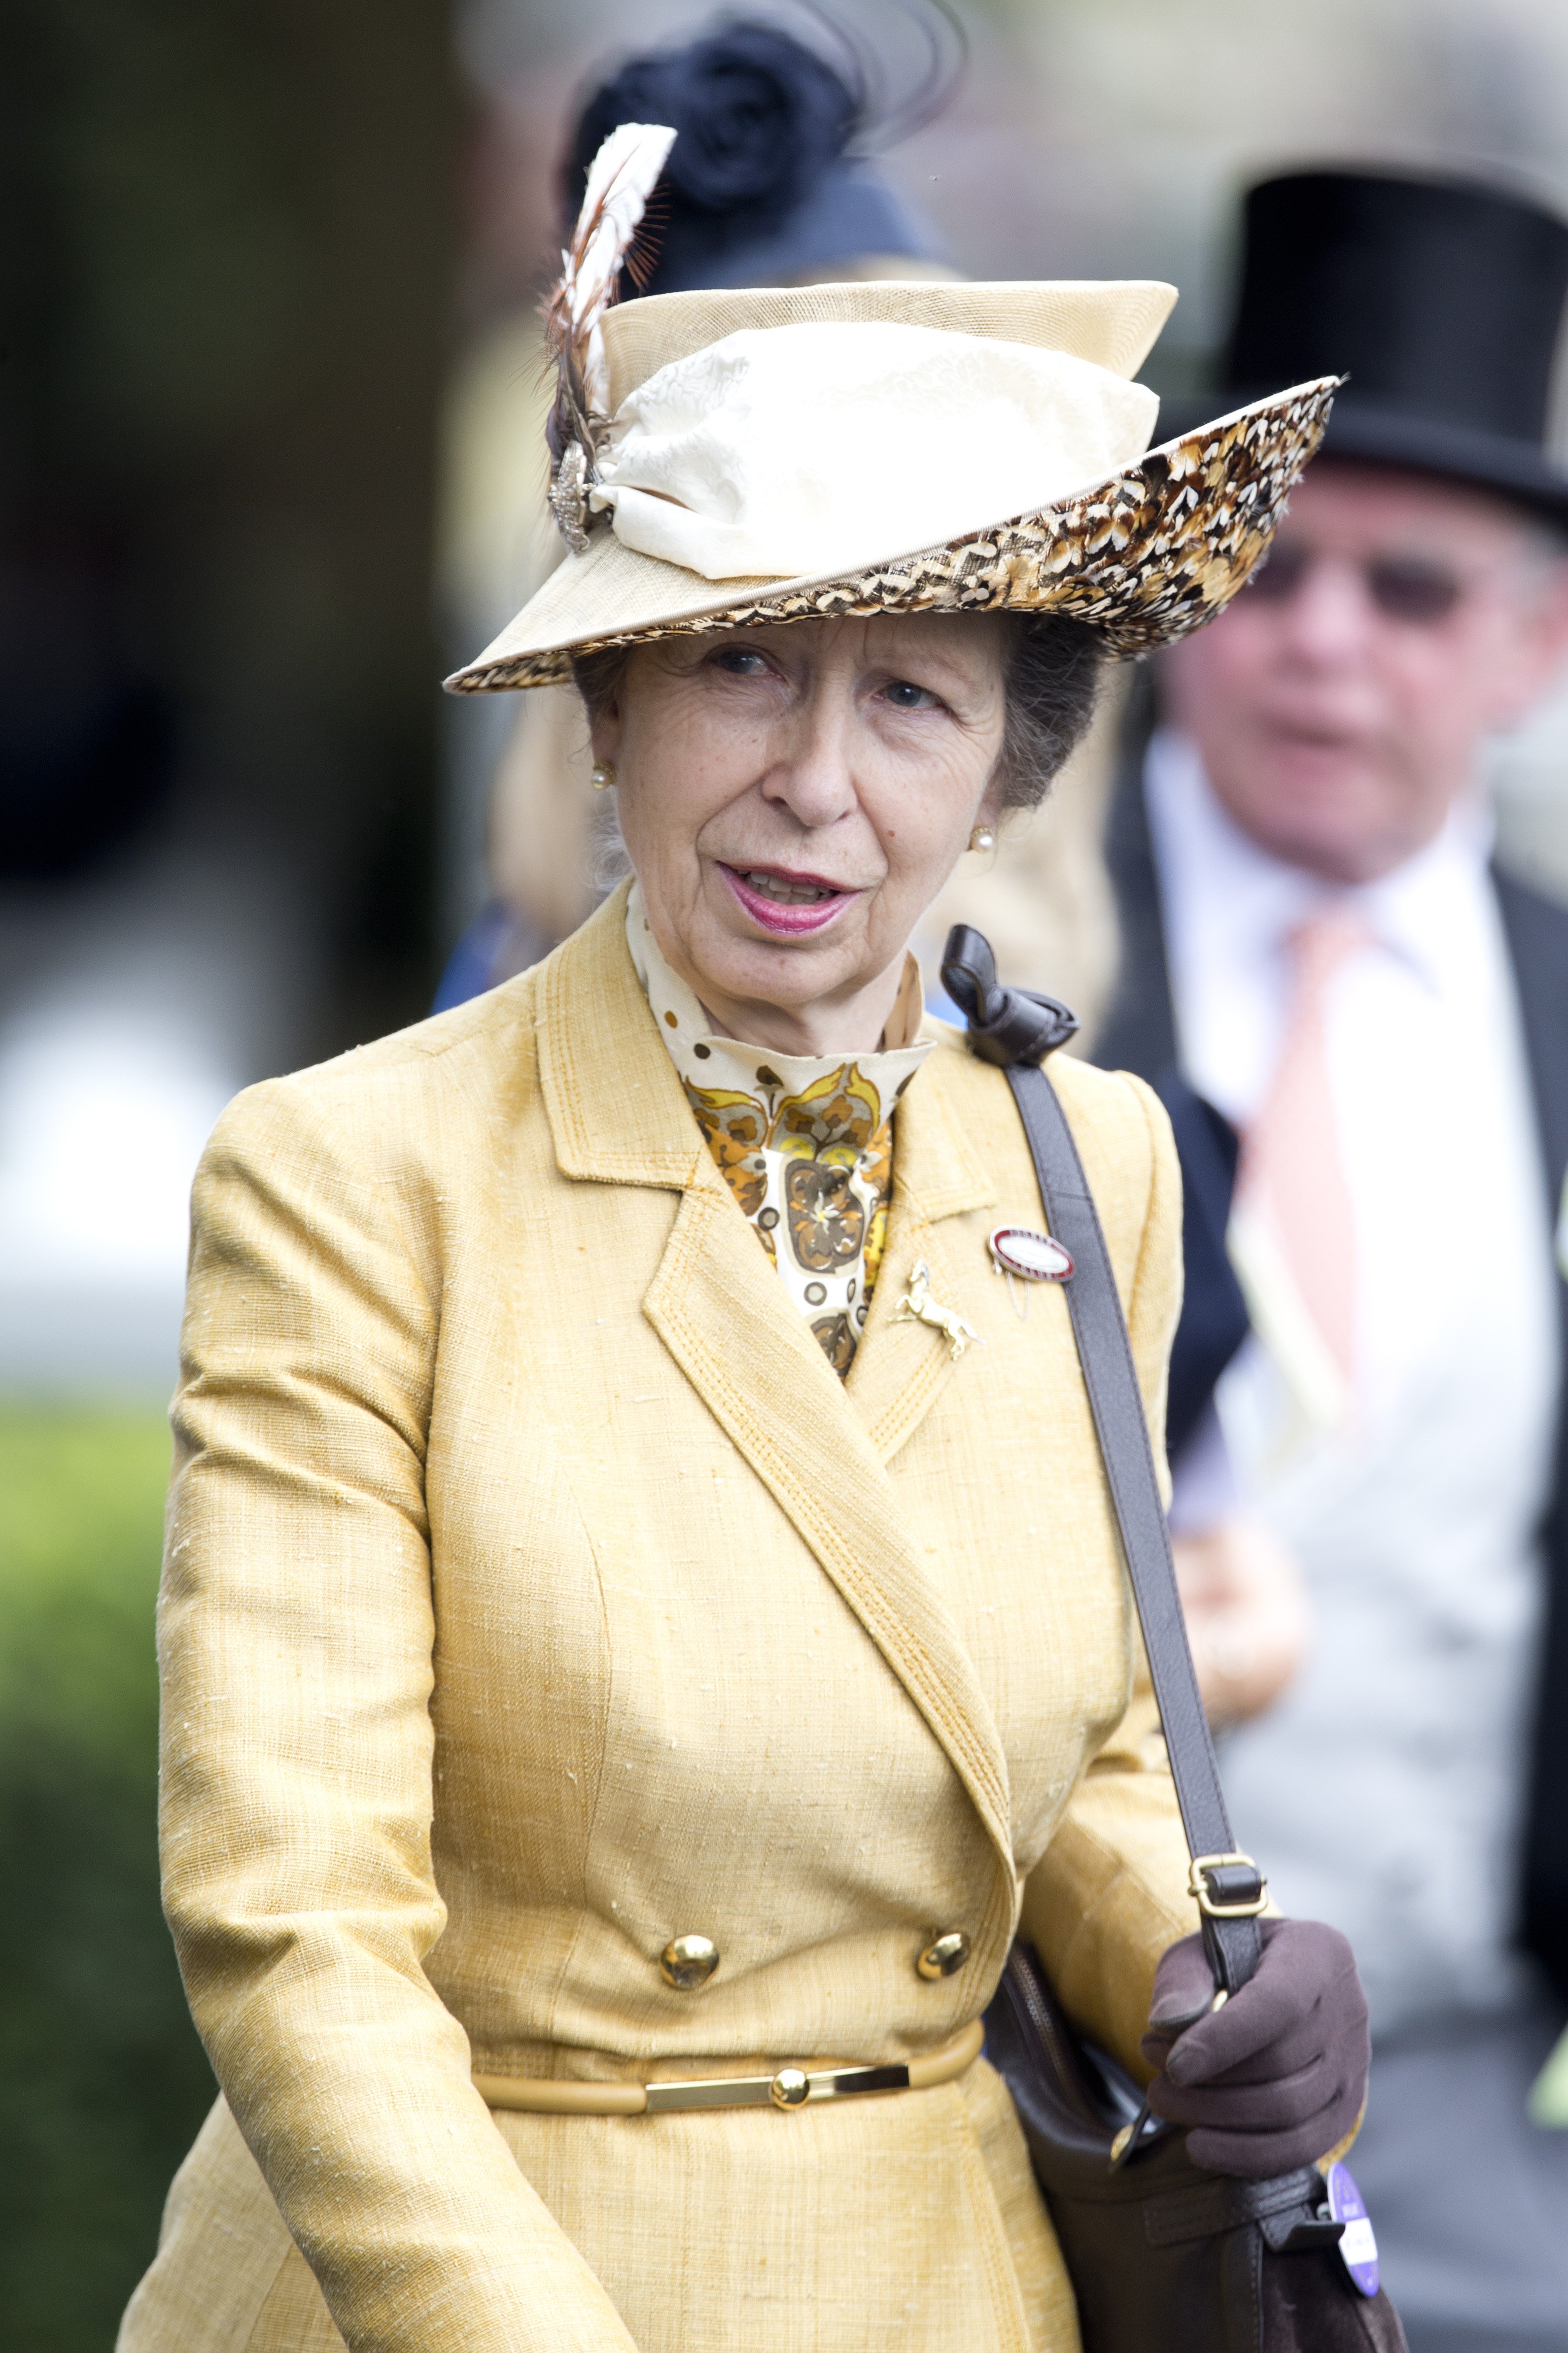 Princess Anne in Ascot England 2015 | Source: Getty Images